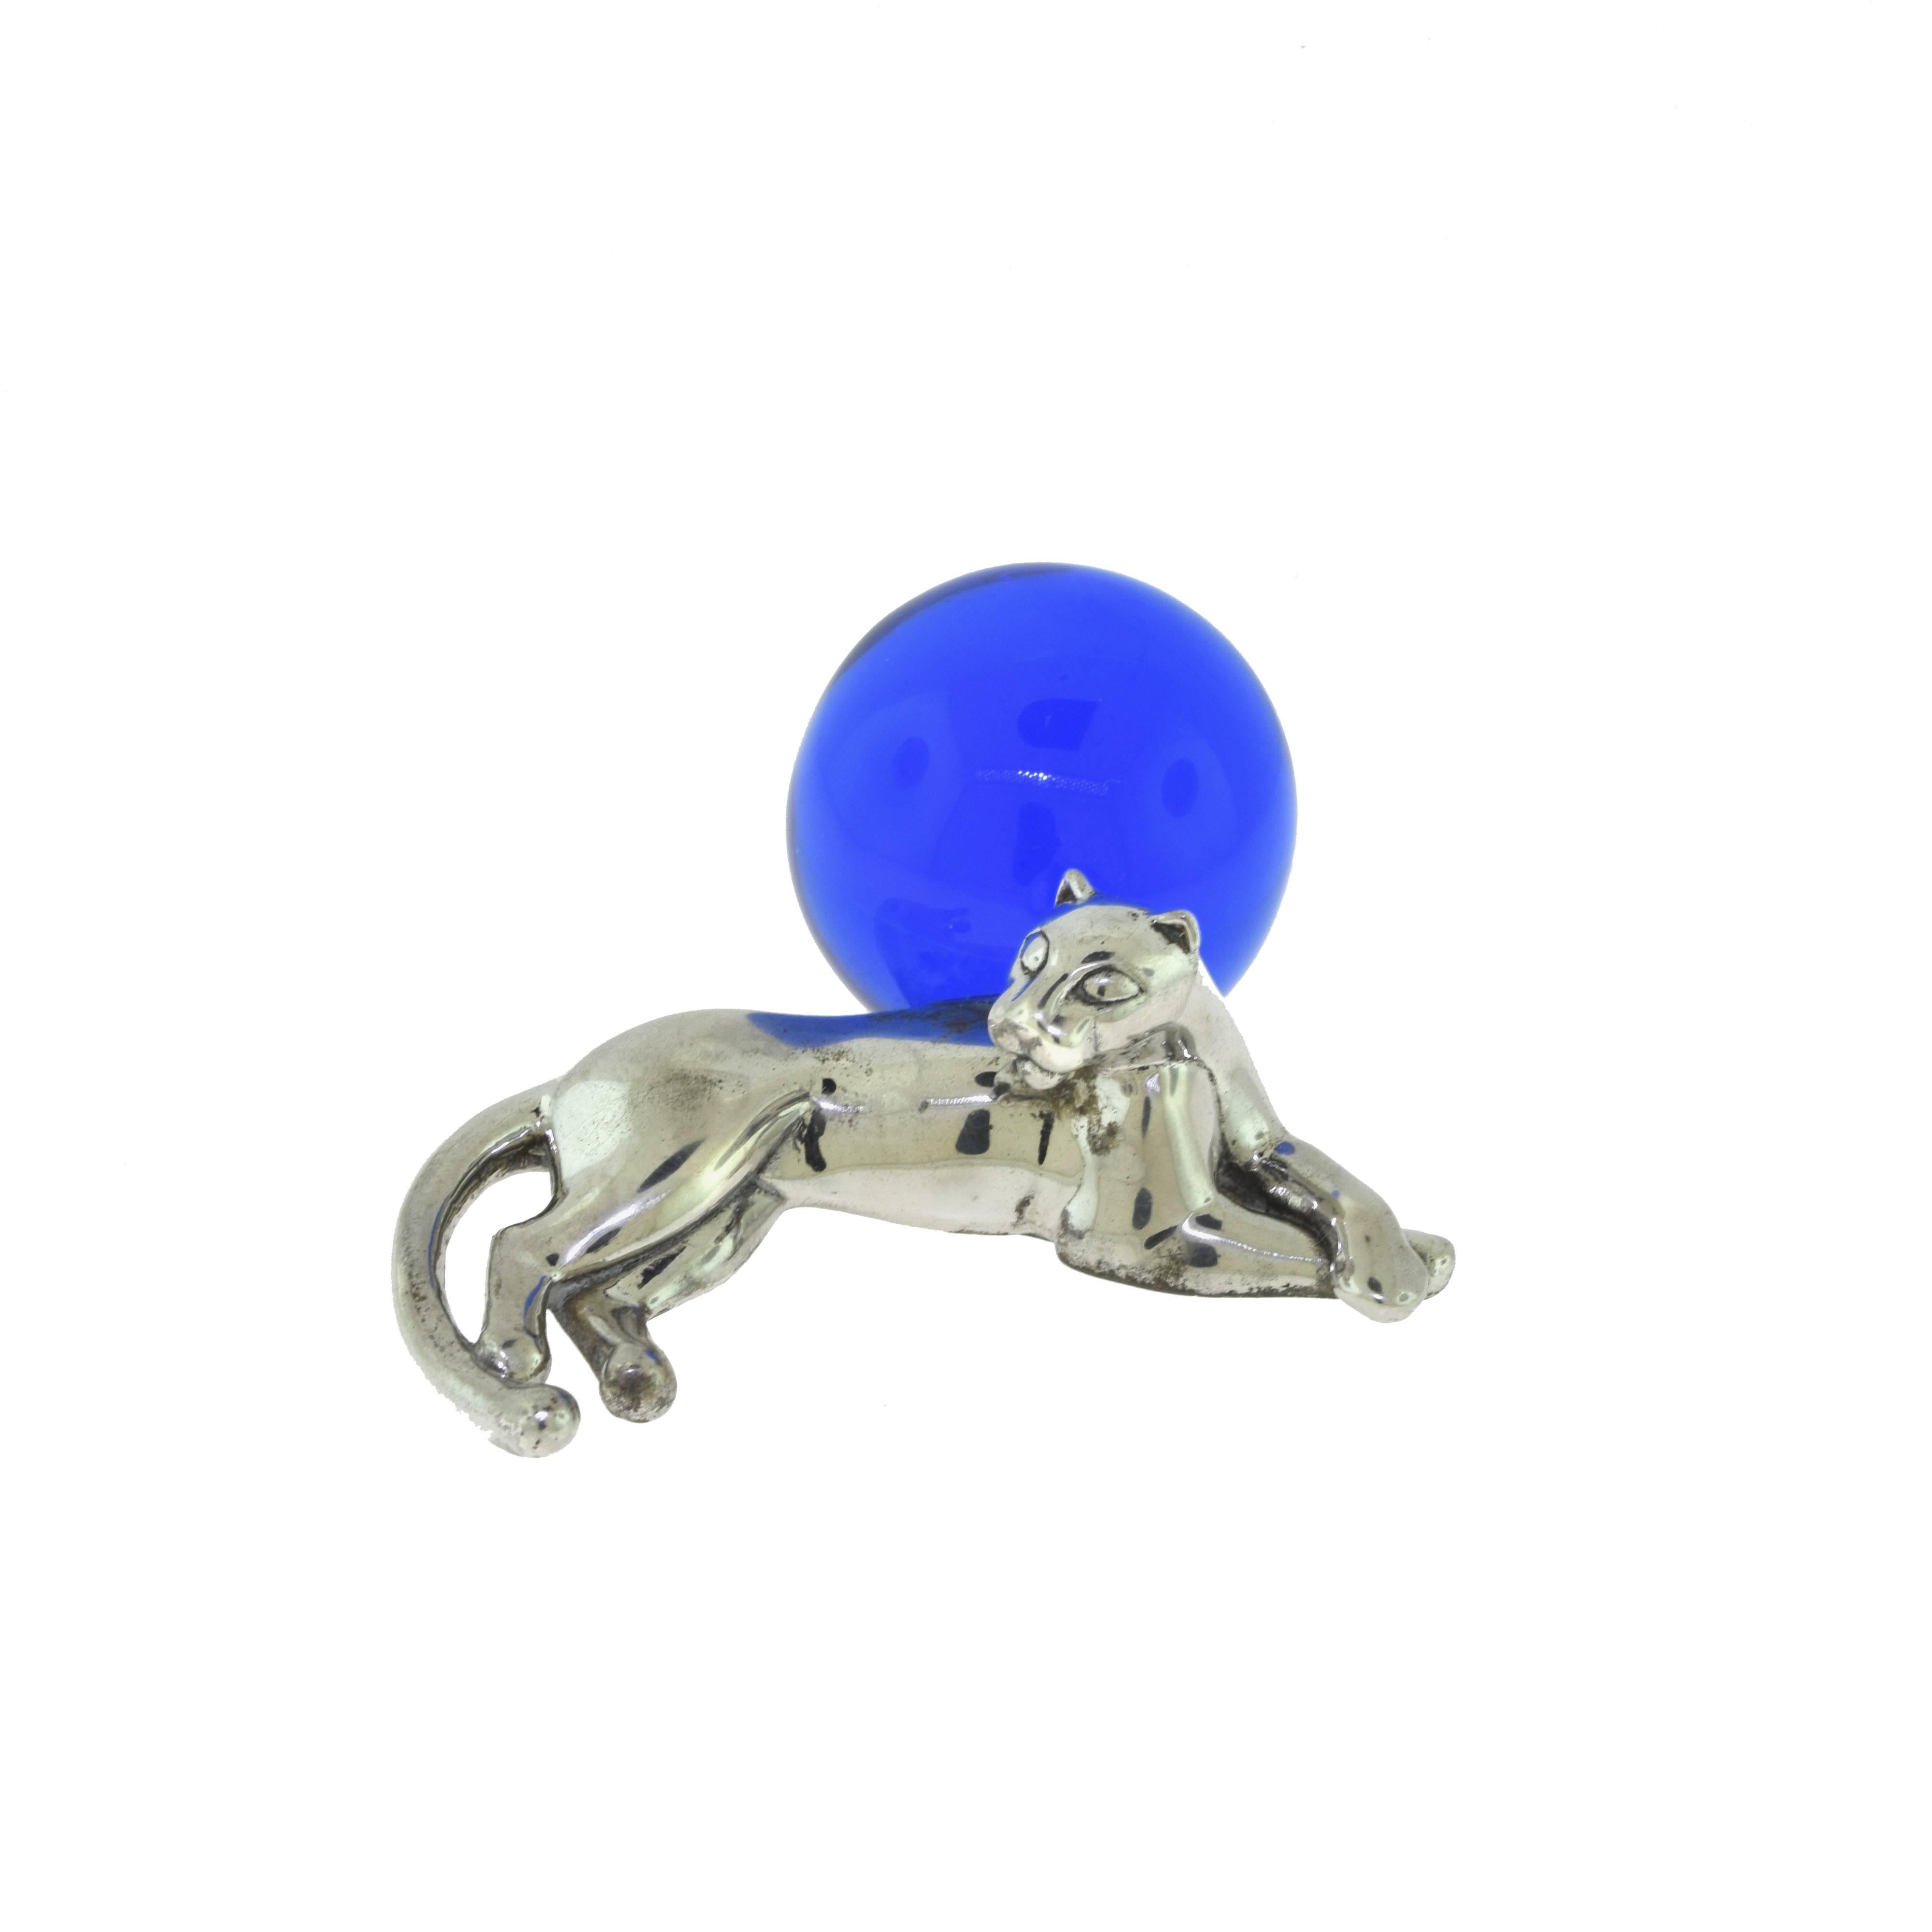 Cartier Silver and Blue Crystal Glass Panther Desk Set Paperweight Ornaments In Fair Condition For Sale In Miami, FL